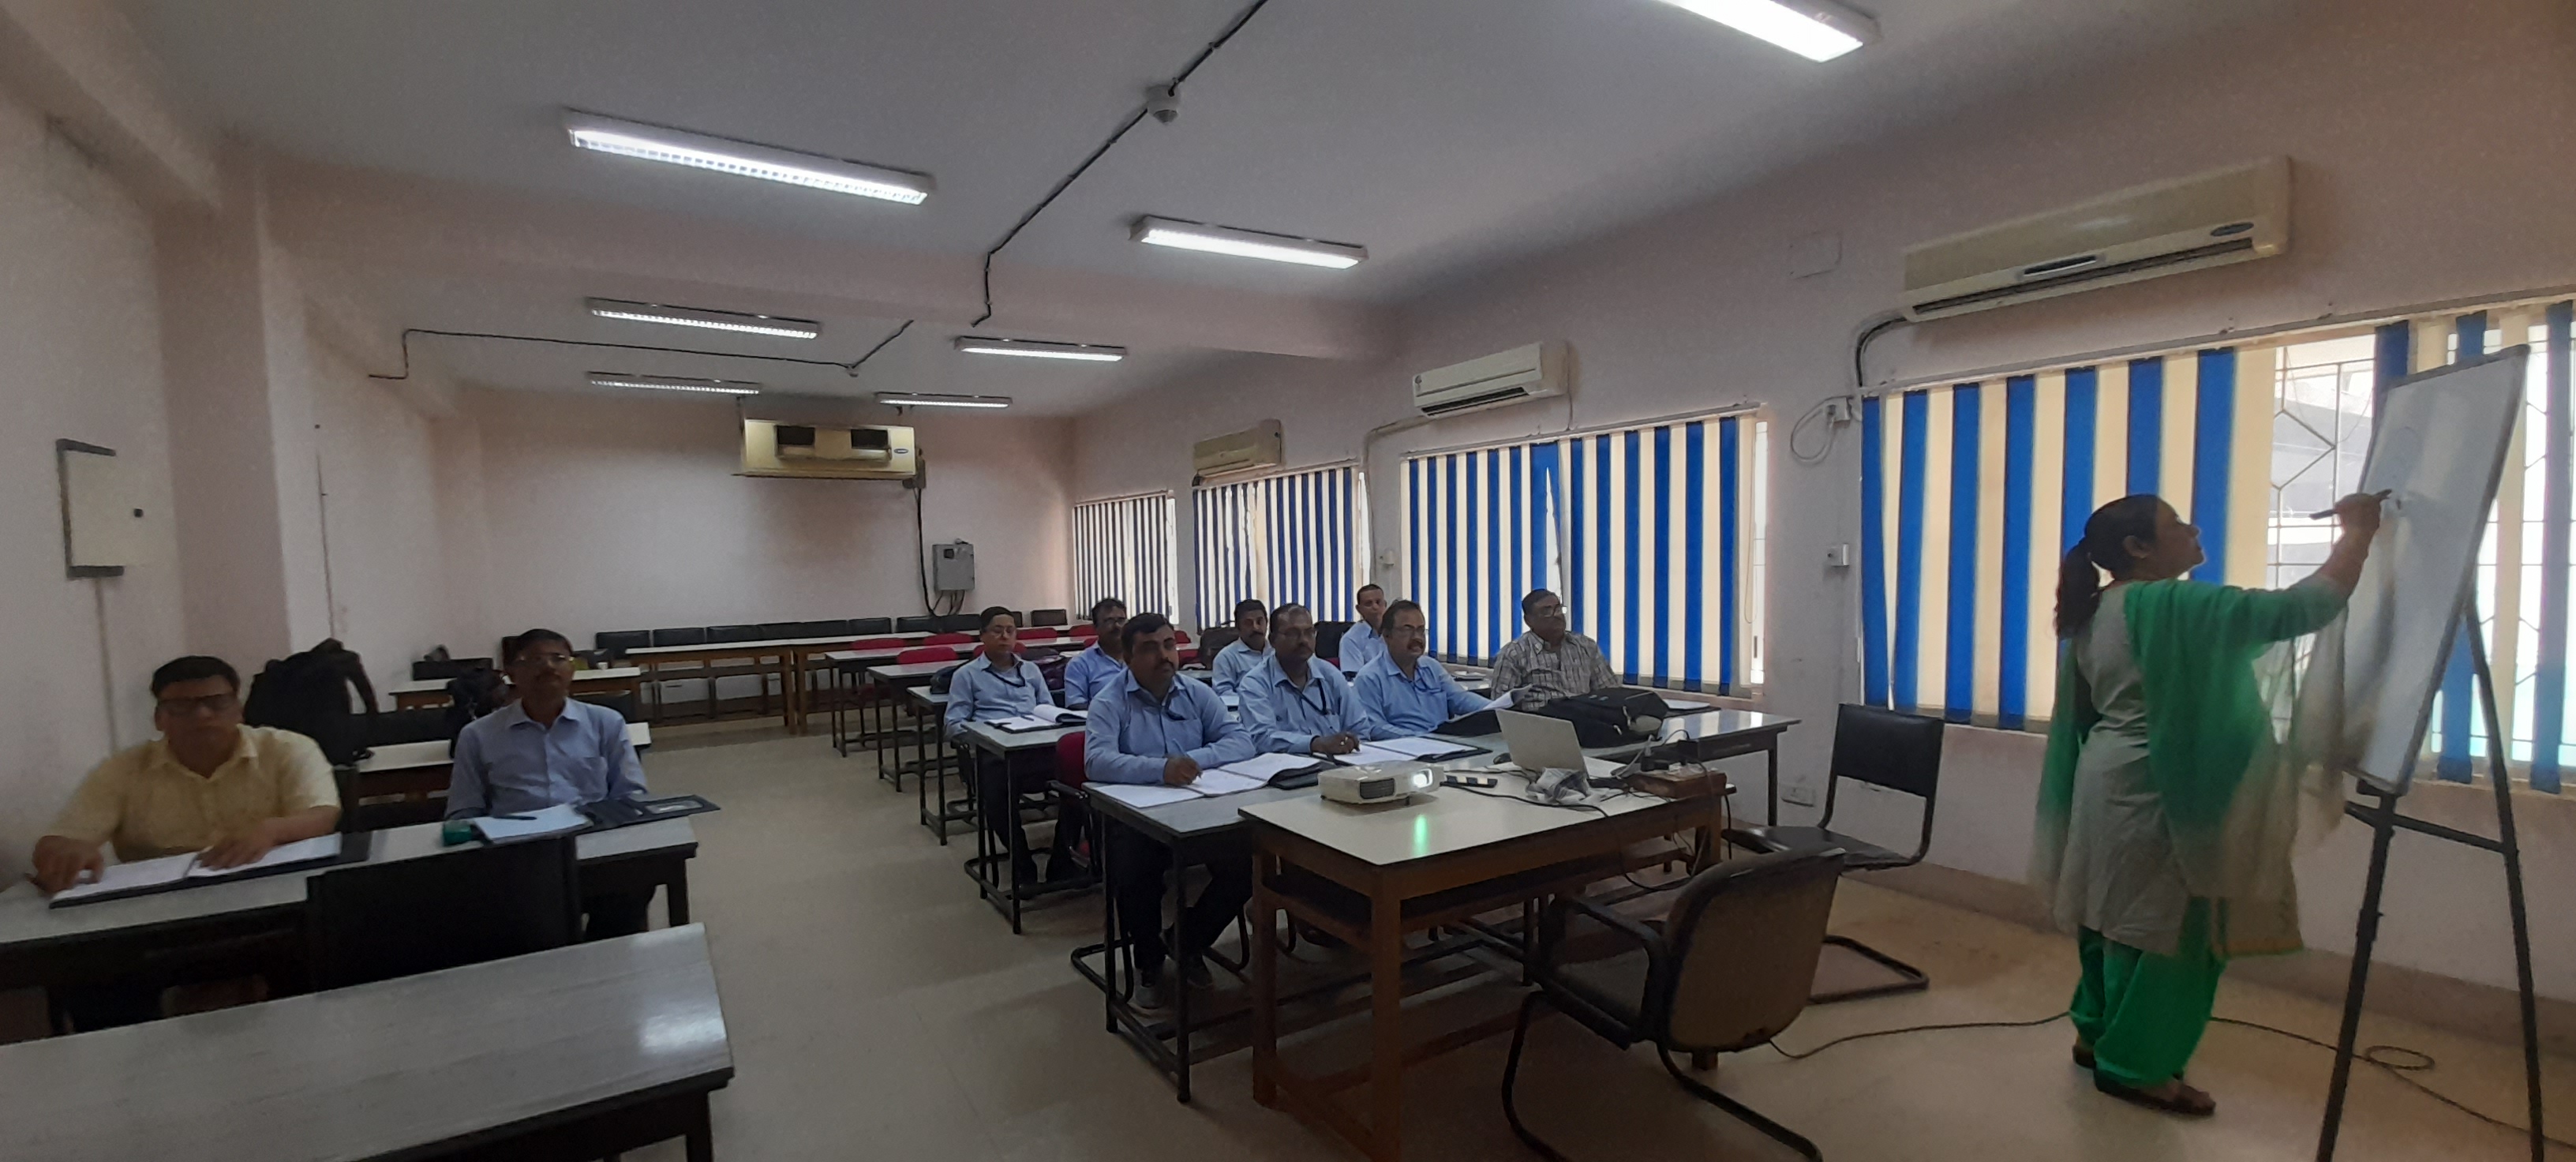 Commencement of 03 days training on Calibration of instruments for employees on 10 Apr 23